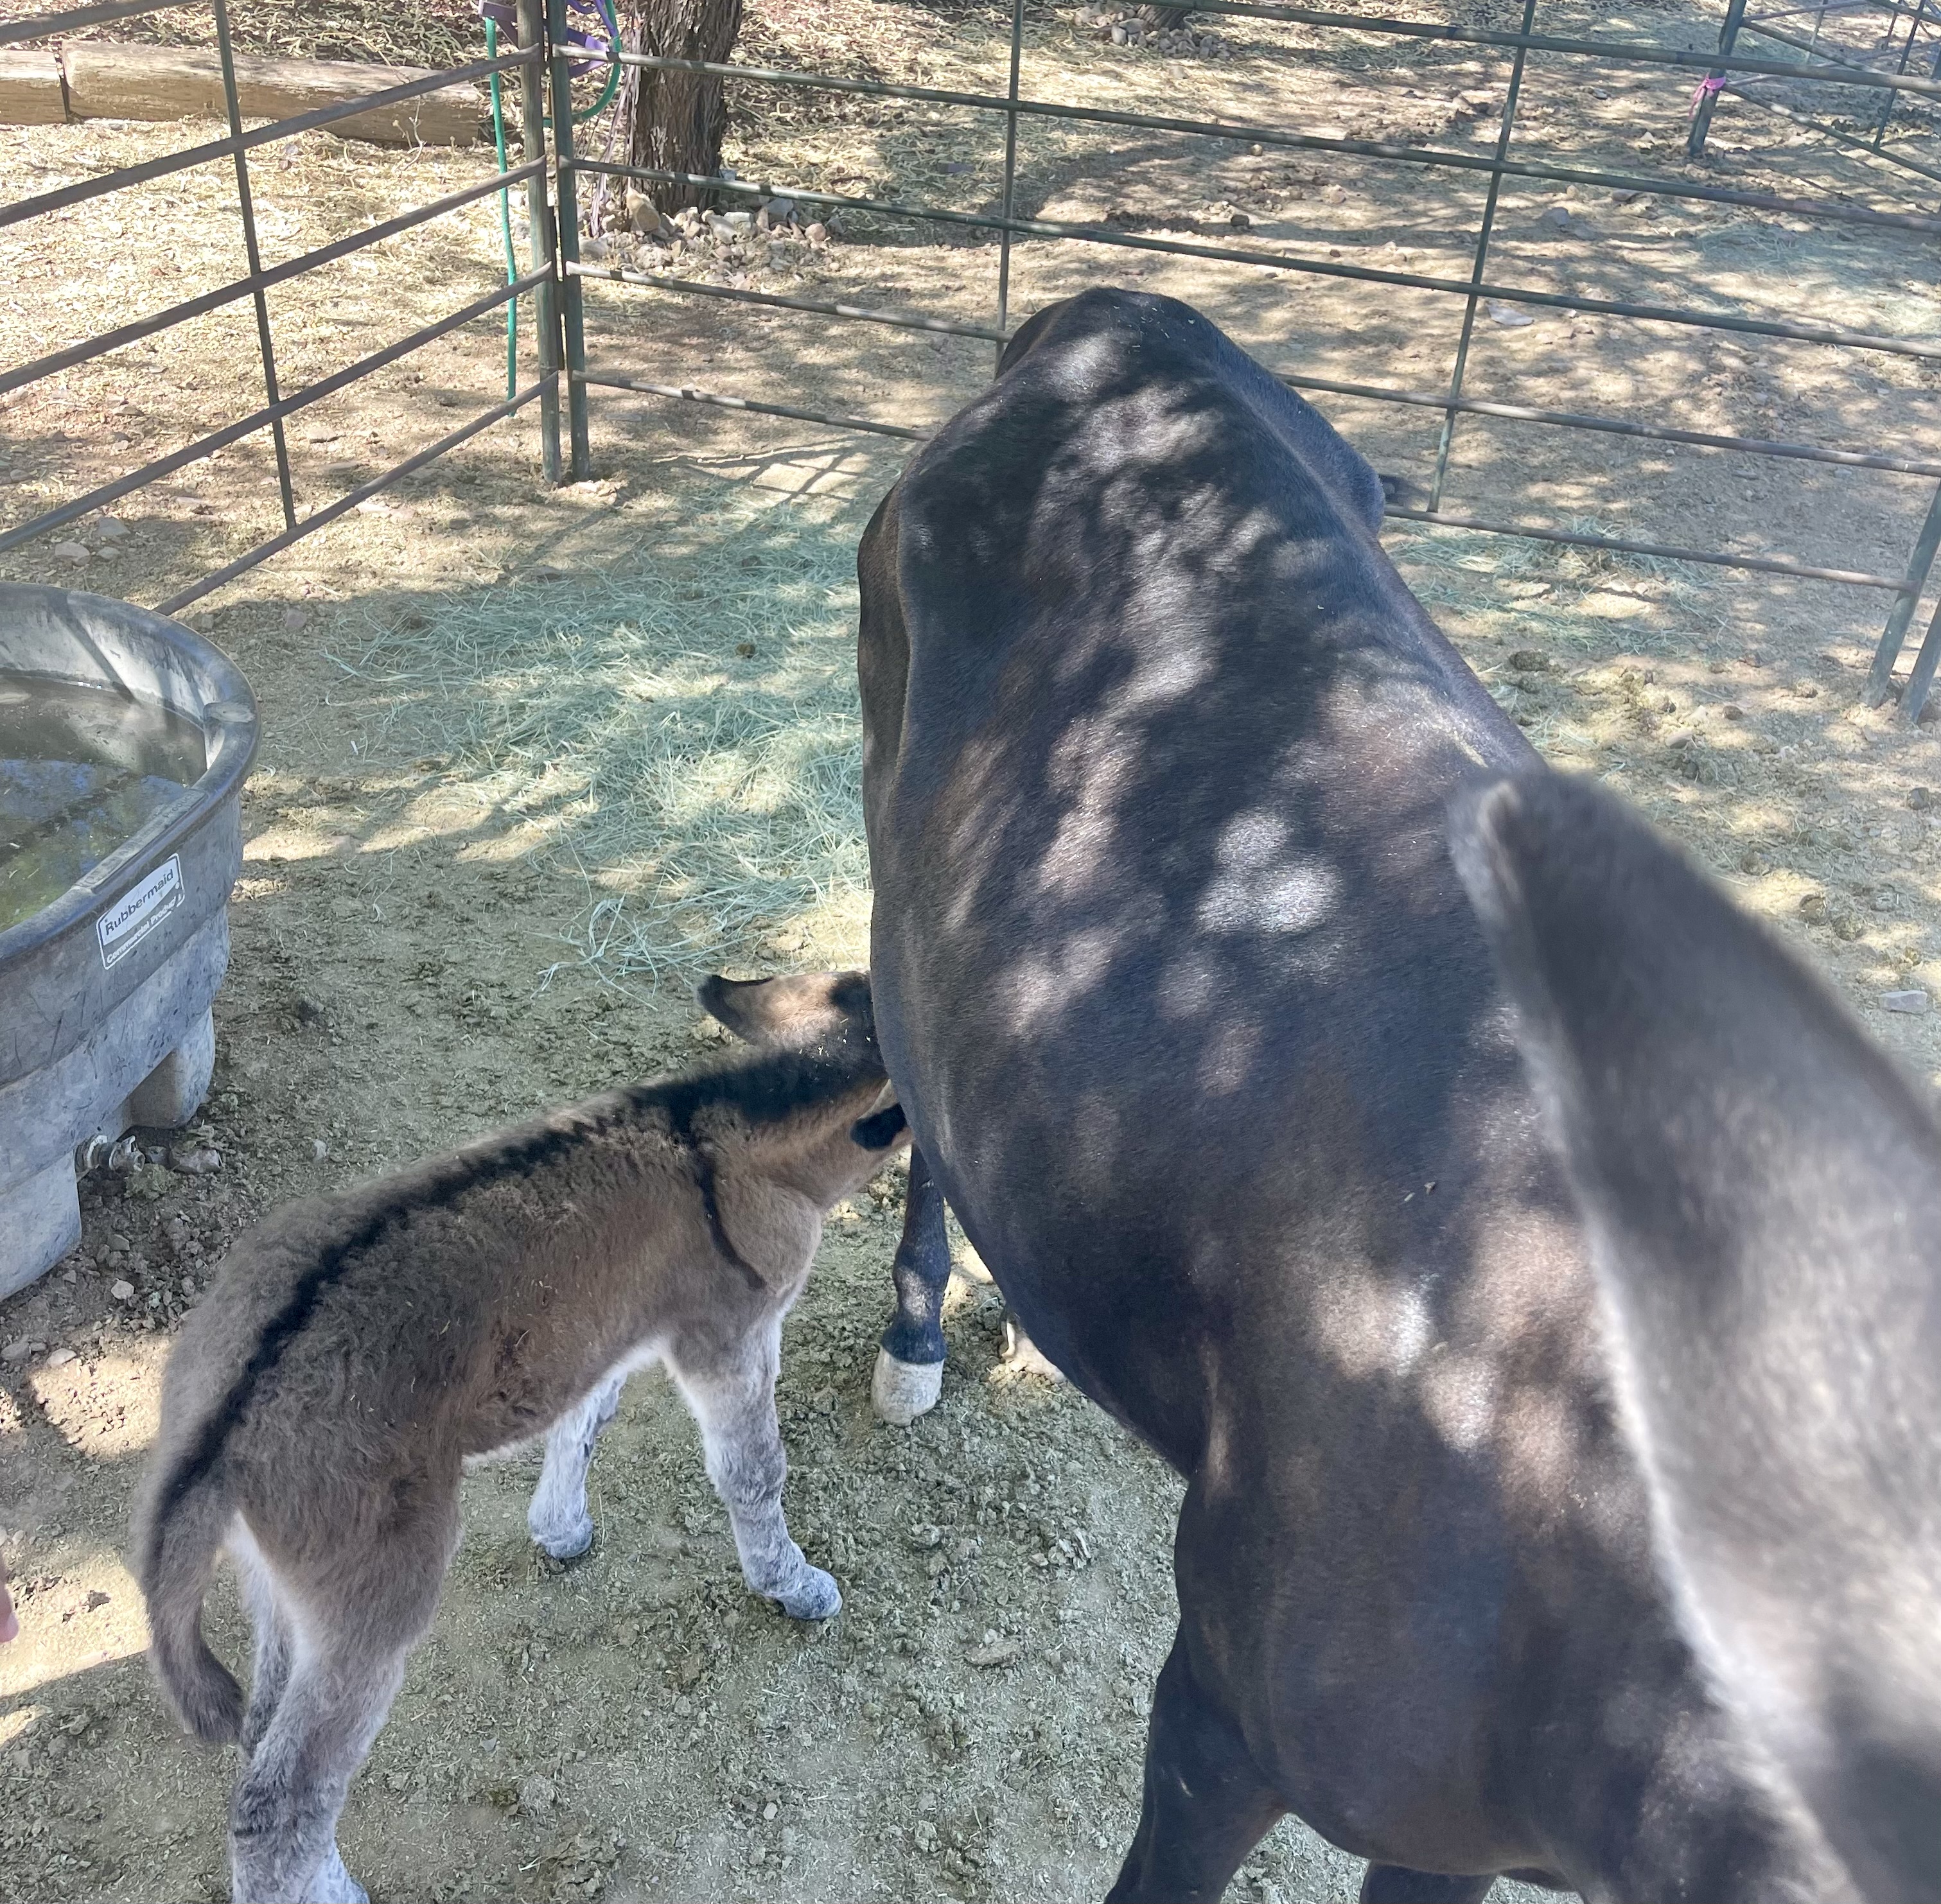 Baby burro Roger feeding at the rescue